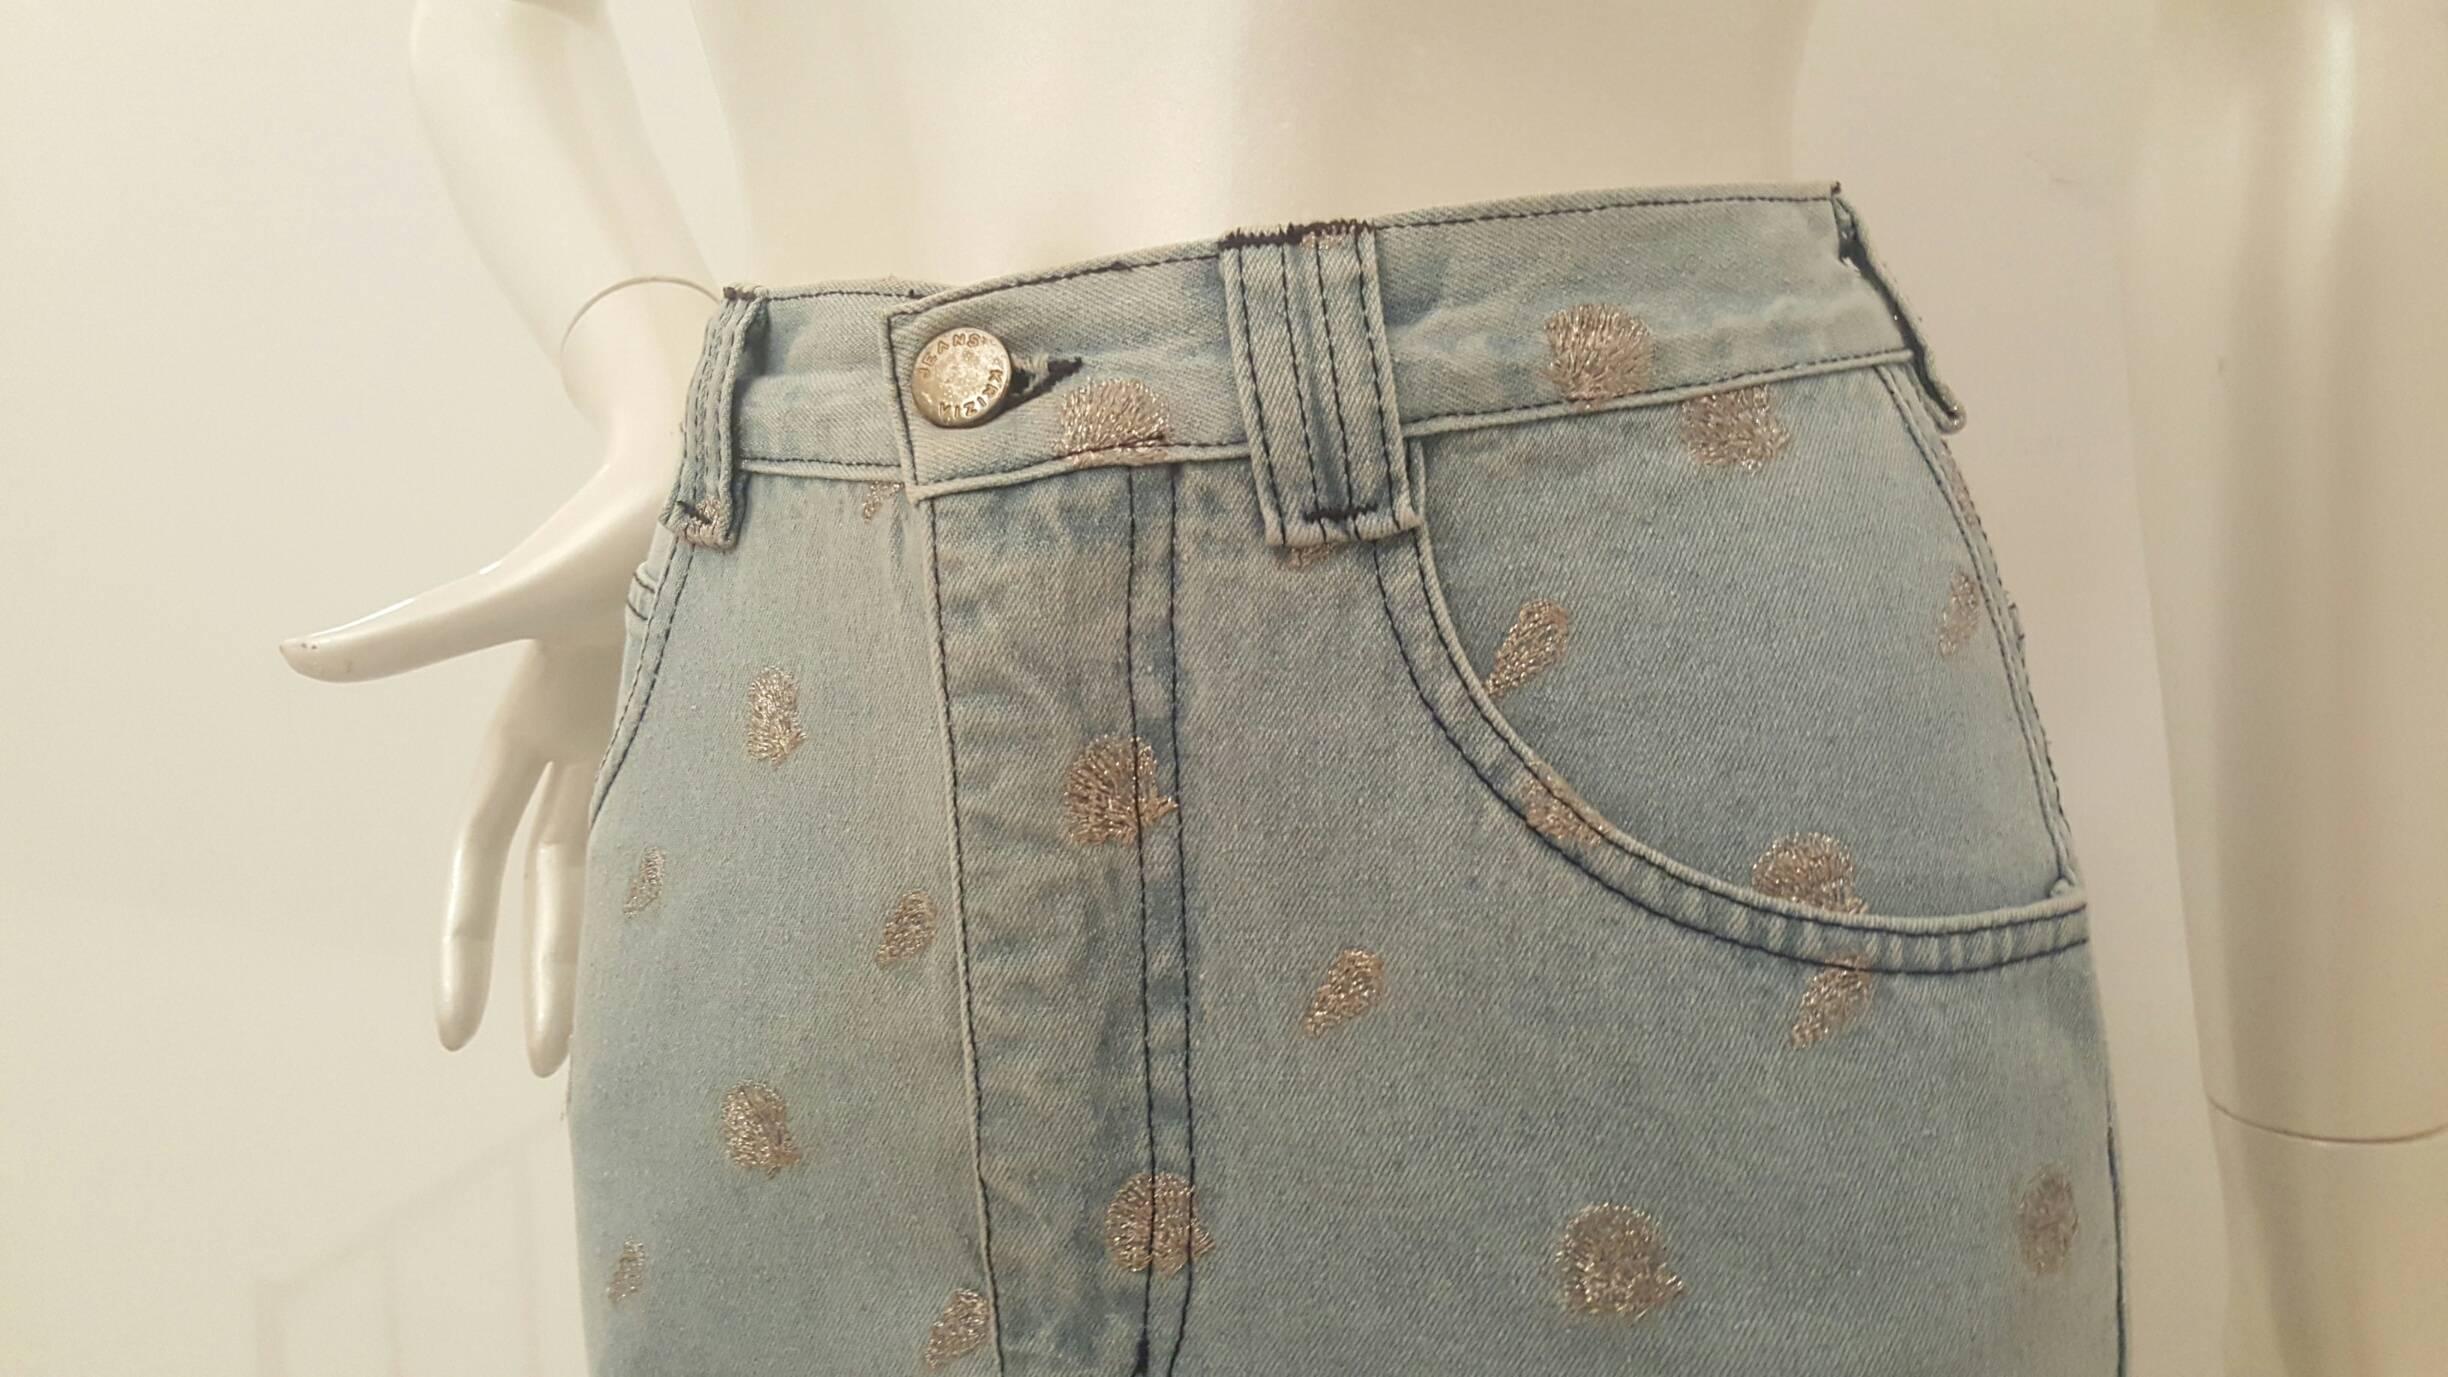 1980s Krizia denim skirt in denim size 27 which corresponds to italian size range 41
silver designs all over
totally made in italy in 100% cotton